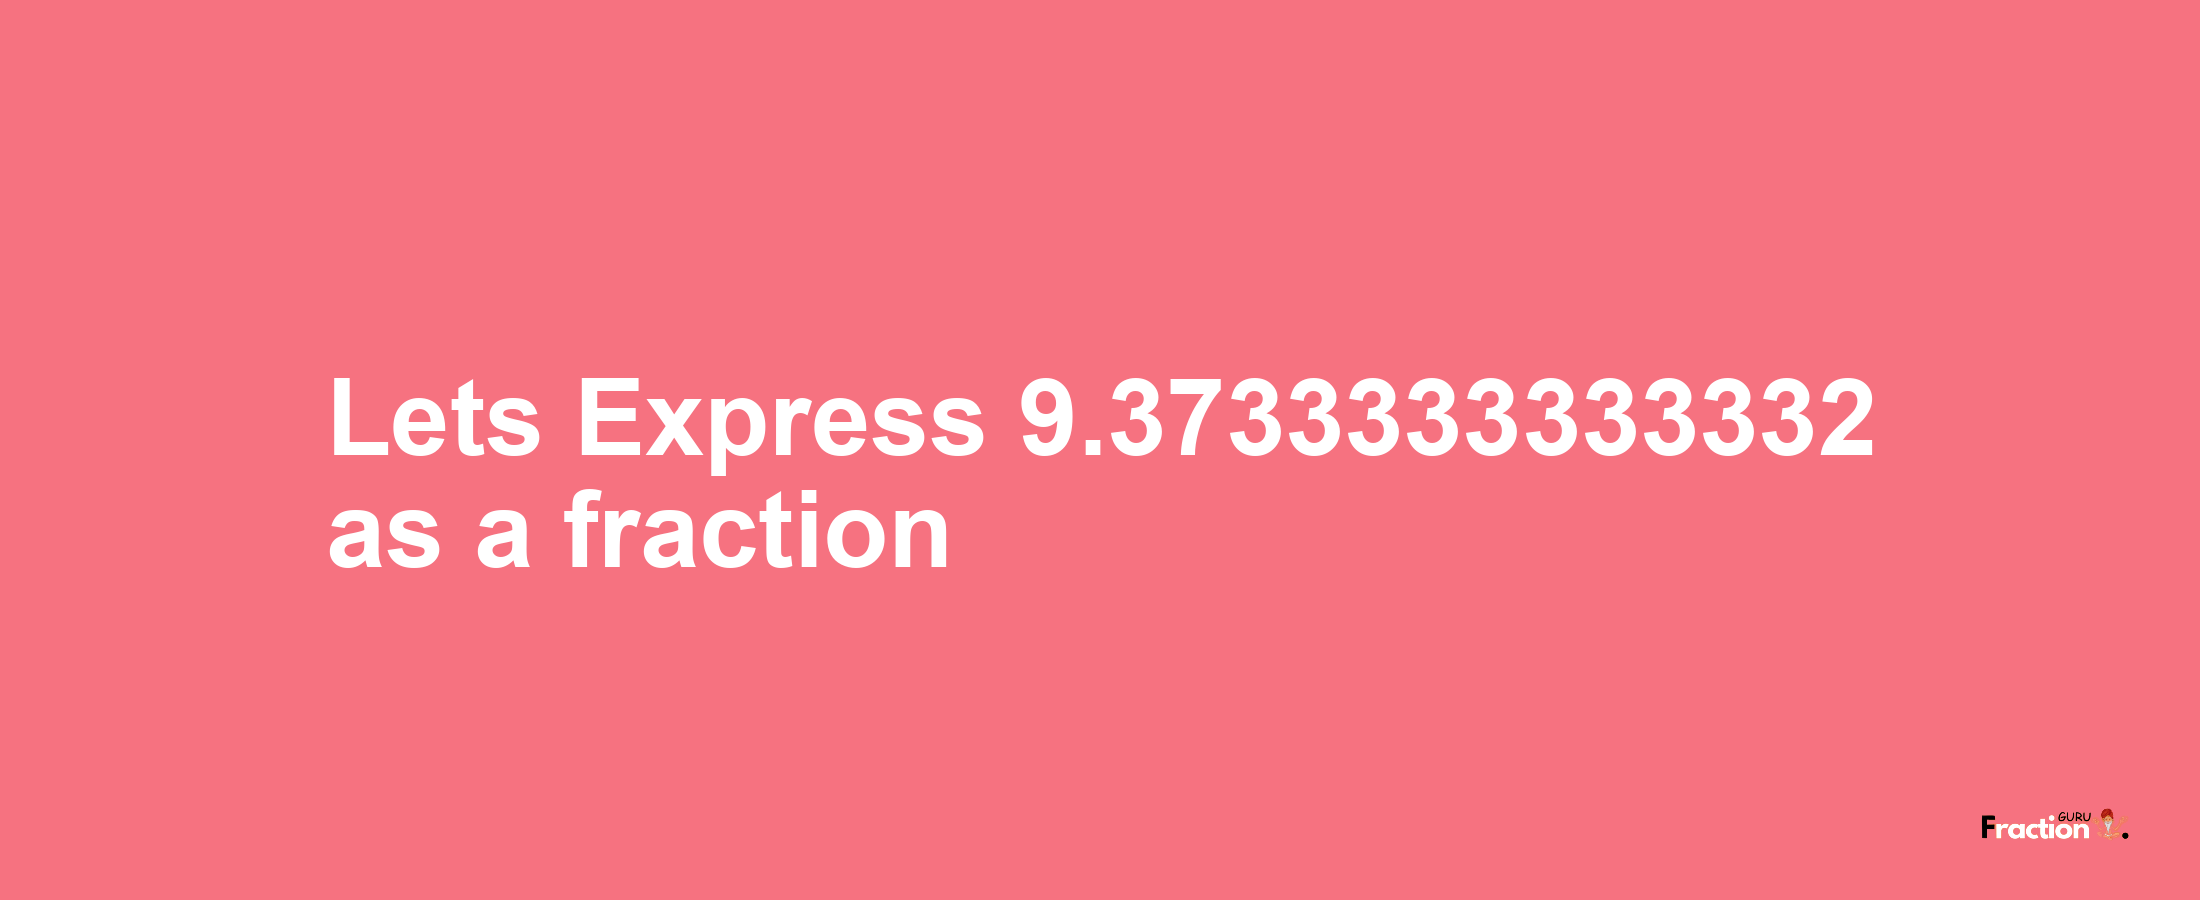 Lets Express 9.3733333333332 as afraction